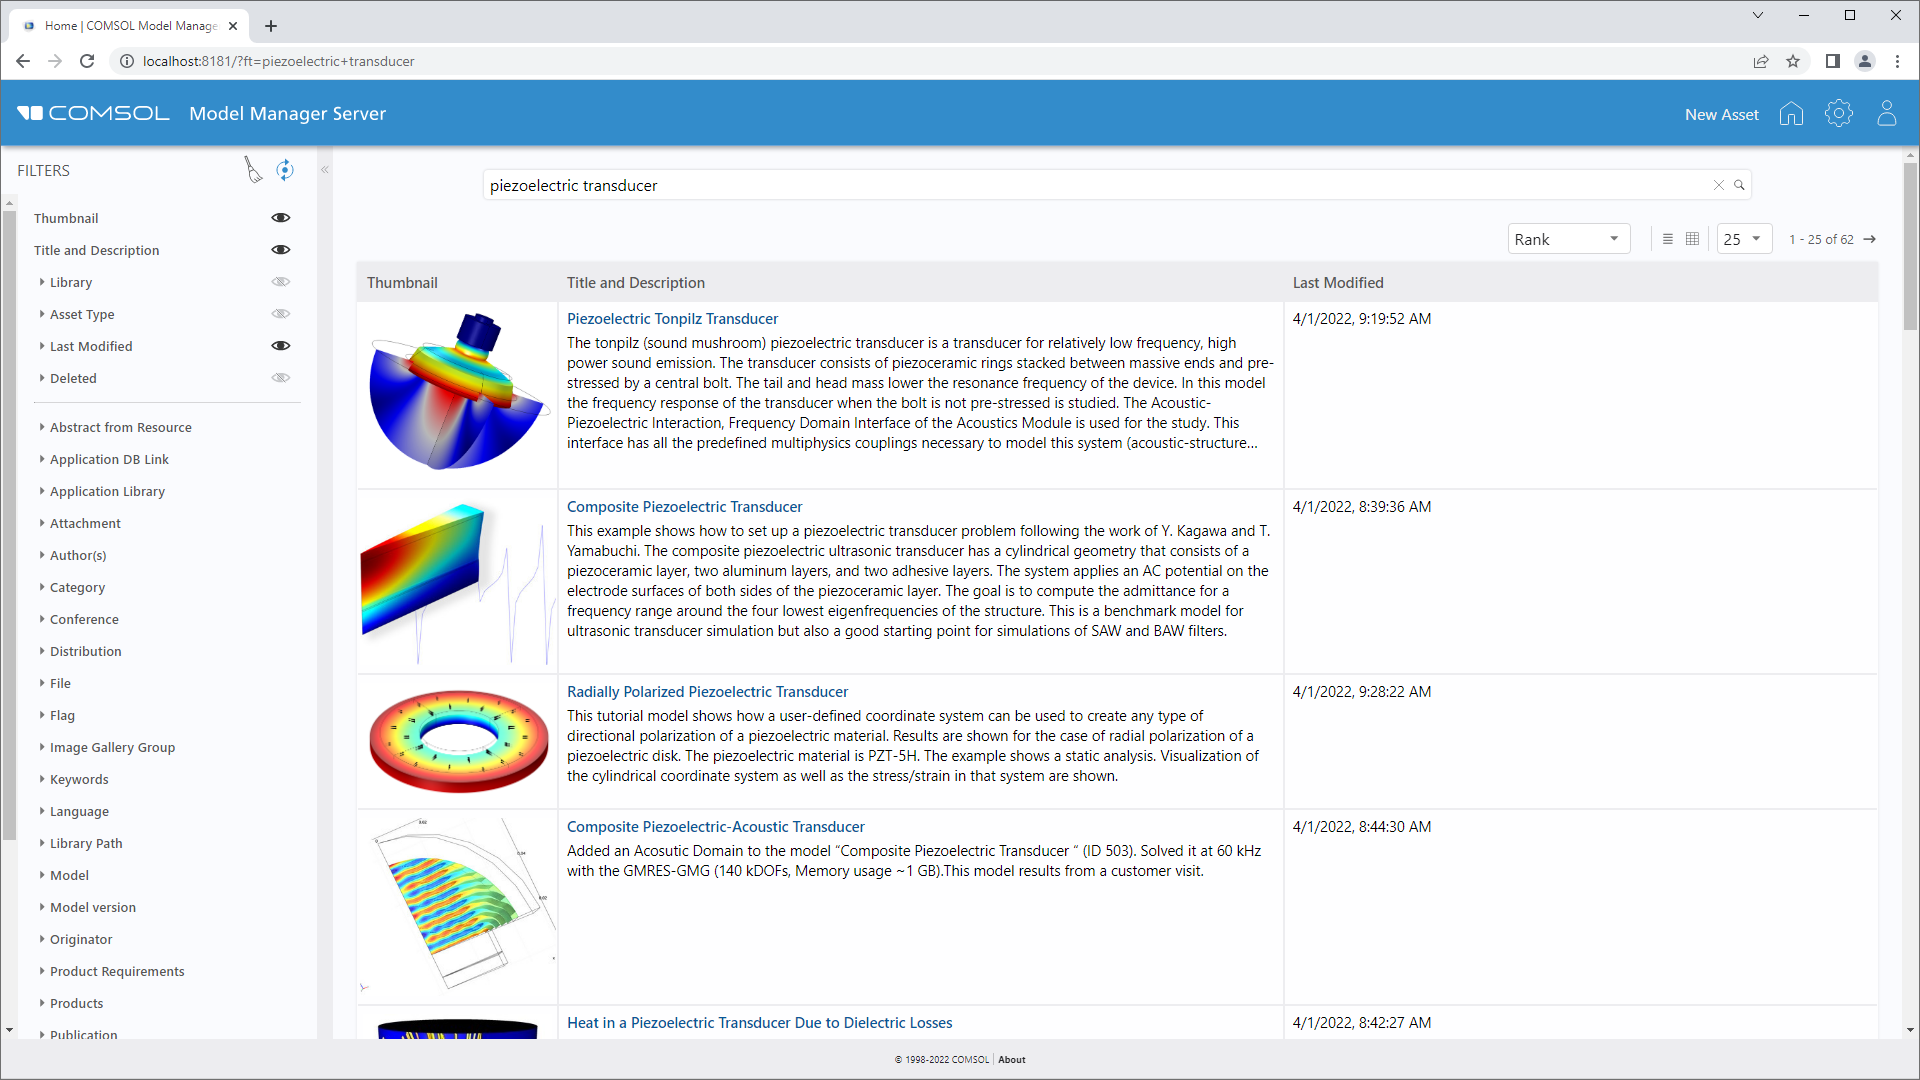 A screenshot of the Model Manager server showing the search filters and asset management system, which appears as a chart showing, from left to right, the thumbnail image, title and description, last modified date, and asset type.